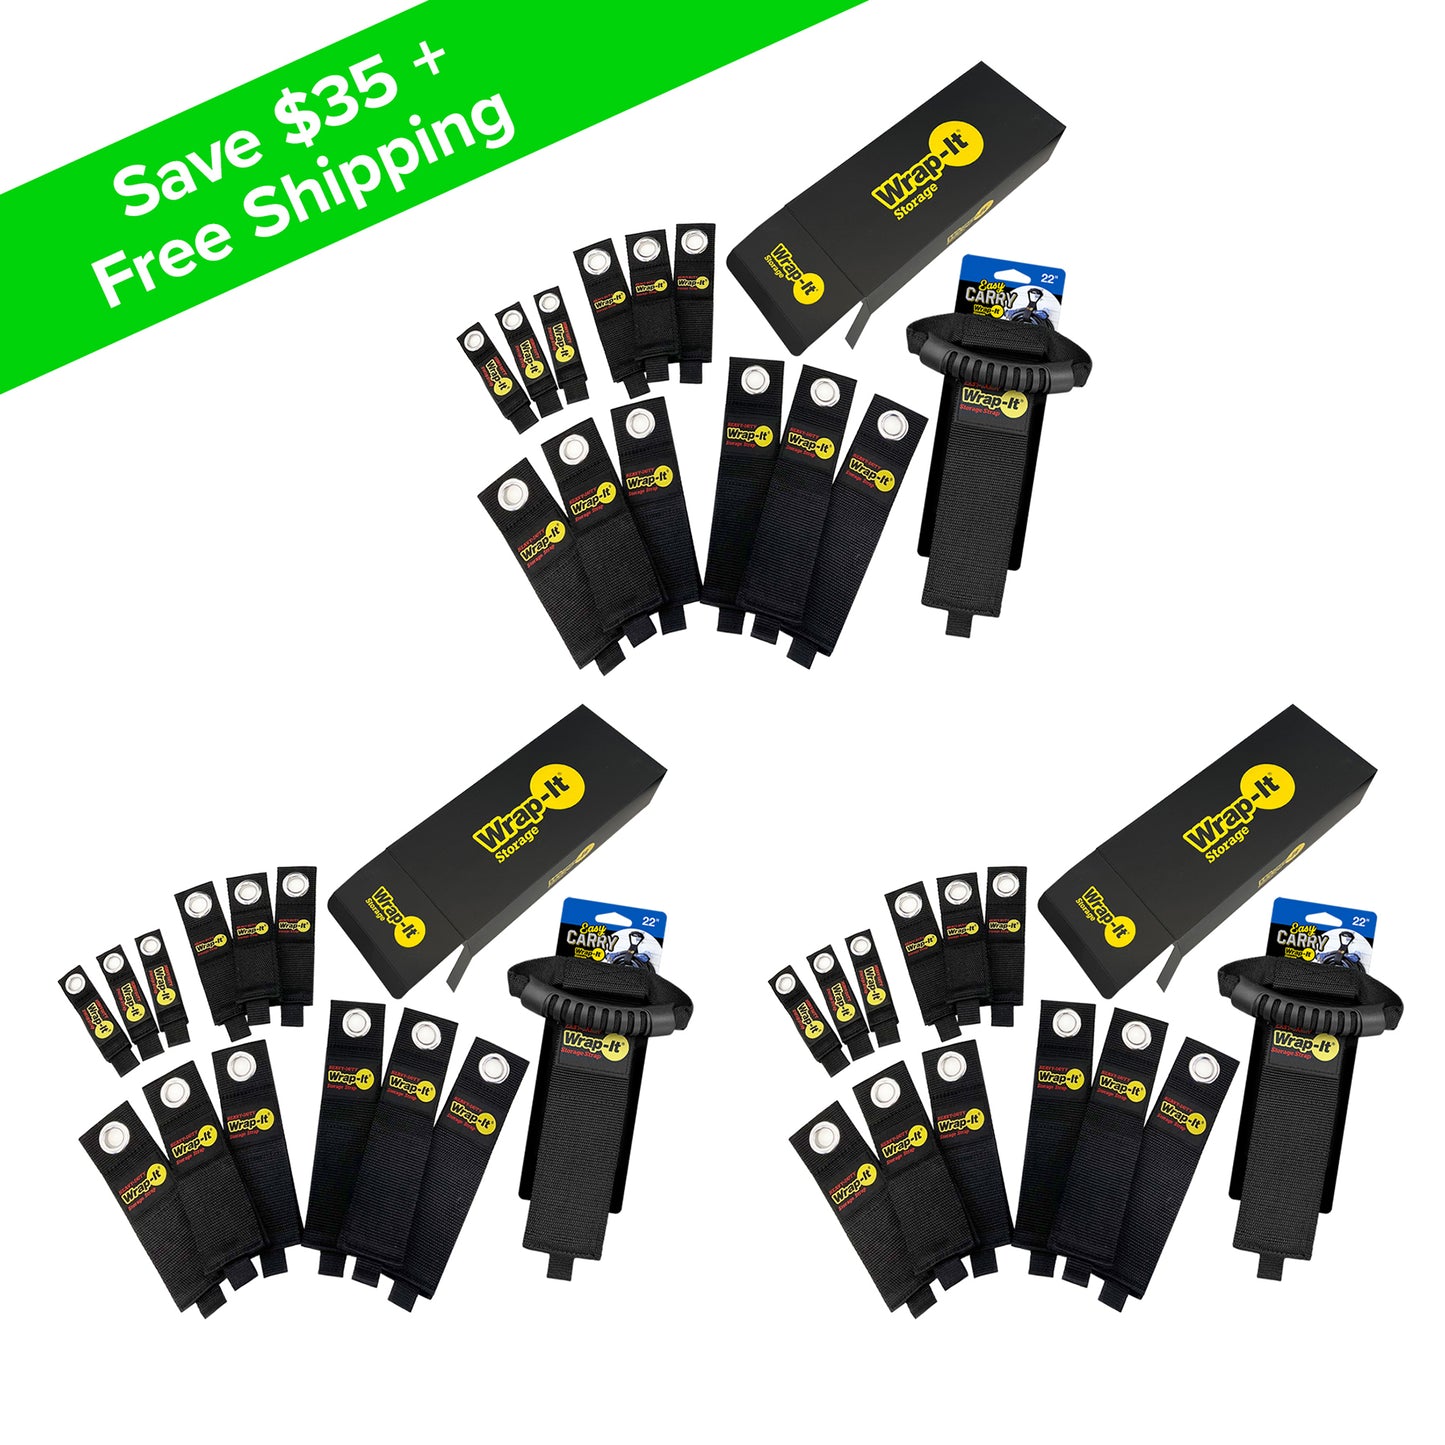 Heavy-Duty Storage Straps - Assorted 36-Pack + (3) 22-in. Easy-Carry Storage Straps